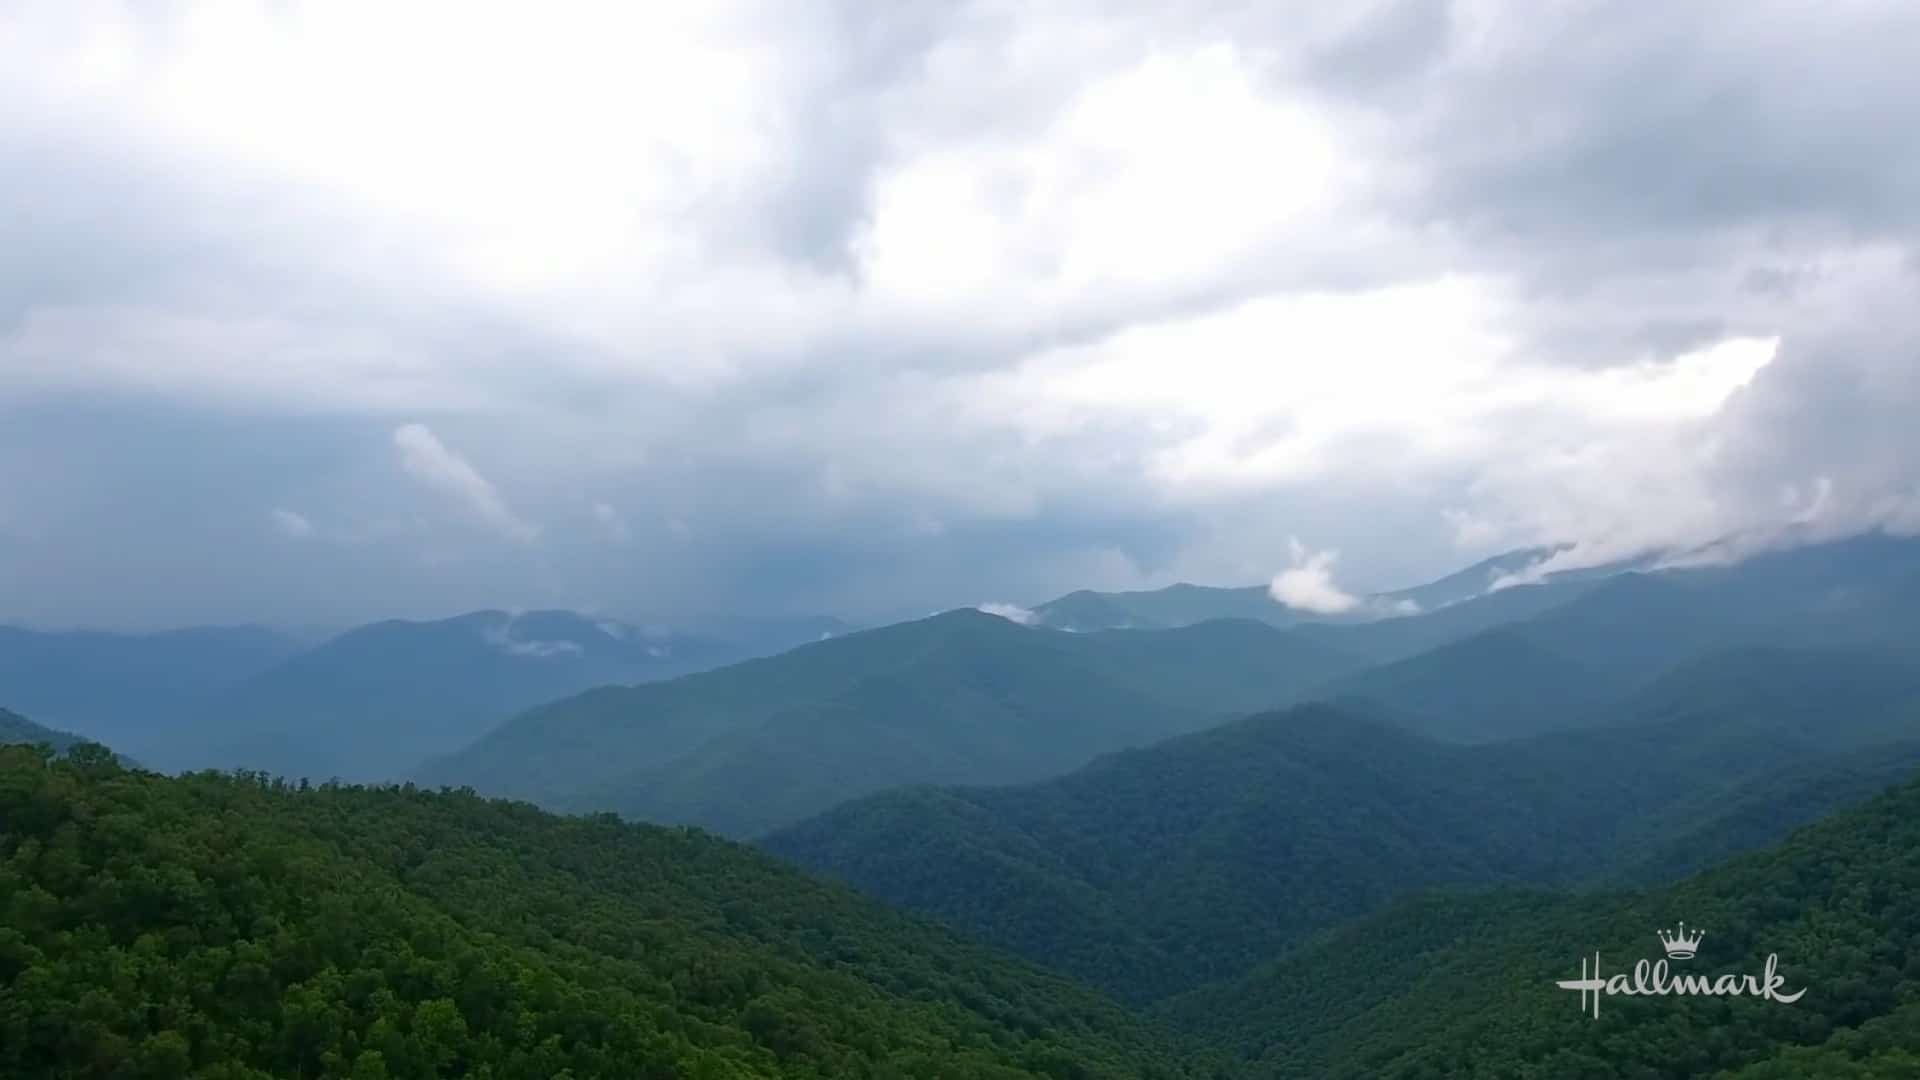 Love in the Great Smoky Mountains Filming Locations